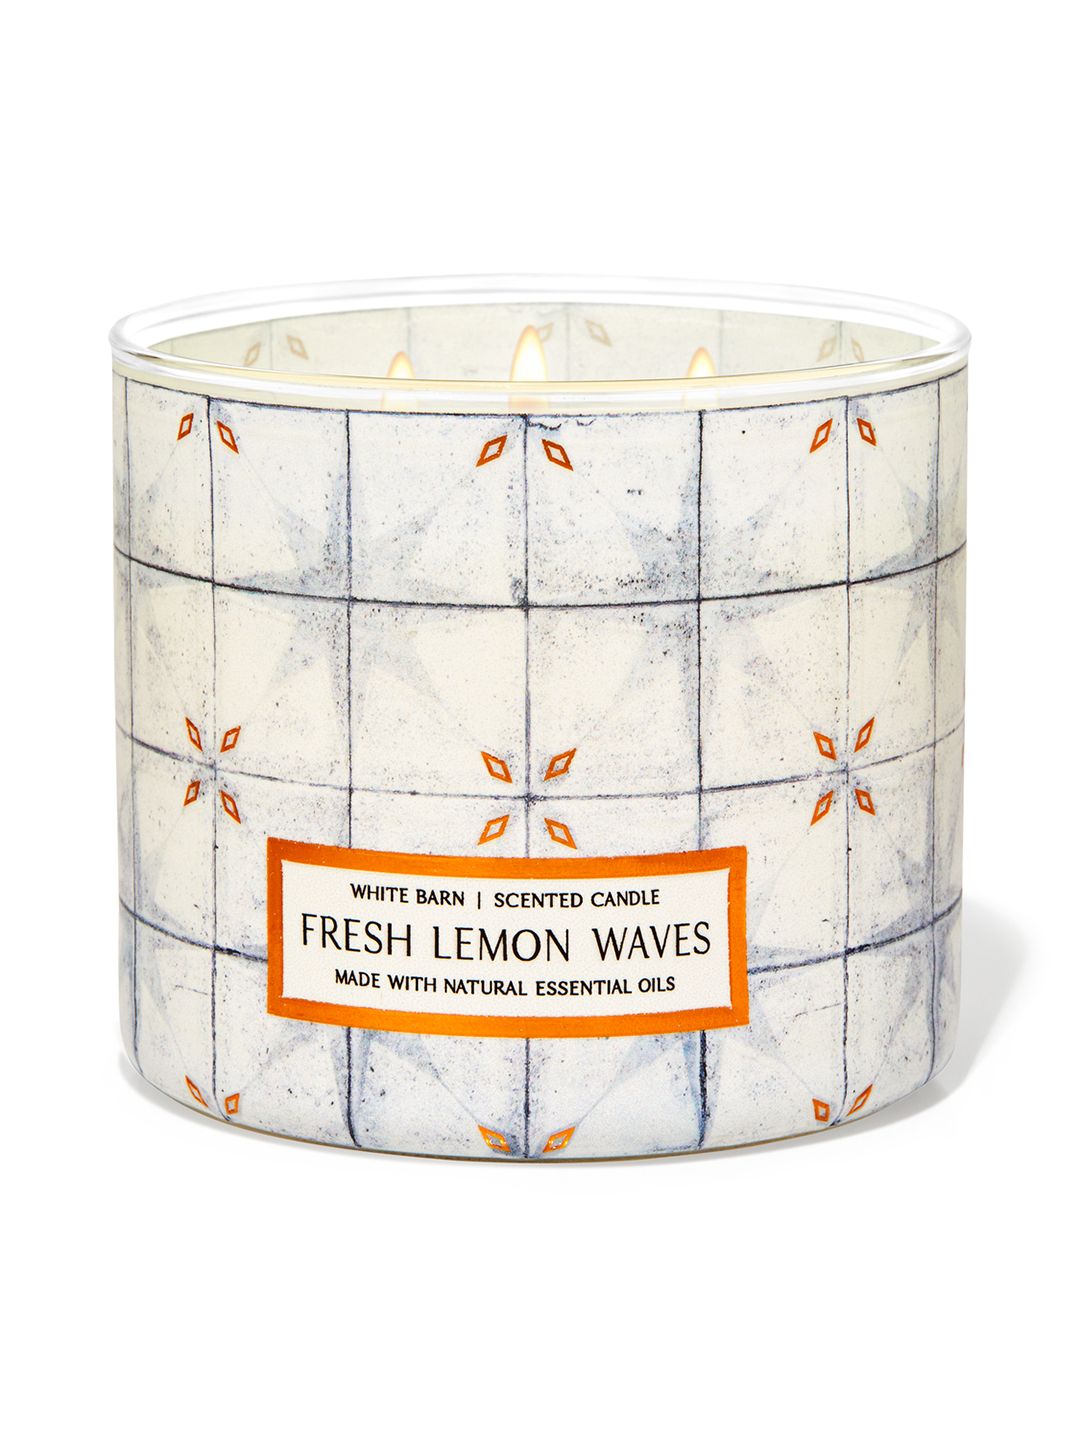 Bath & Body Works Fresh Lemon Waves 3-Wick Candle - 411 g Price in India